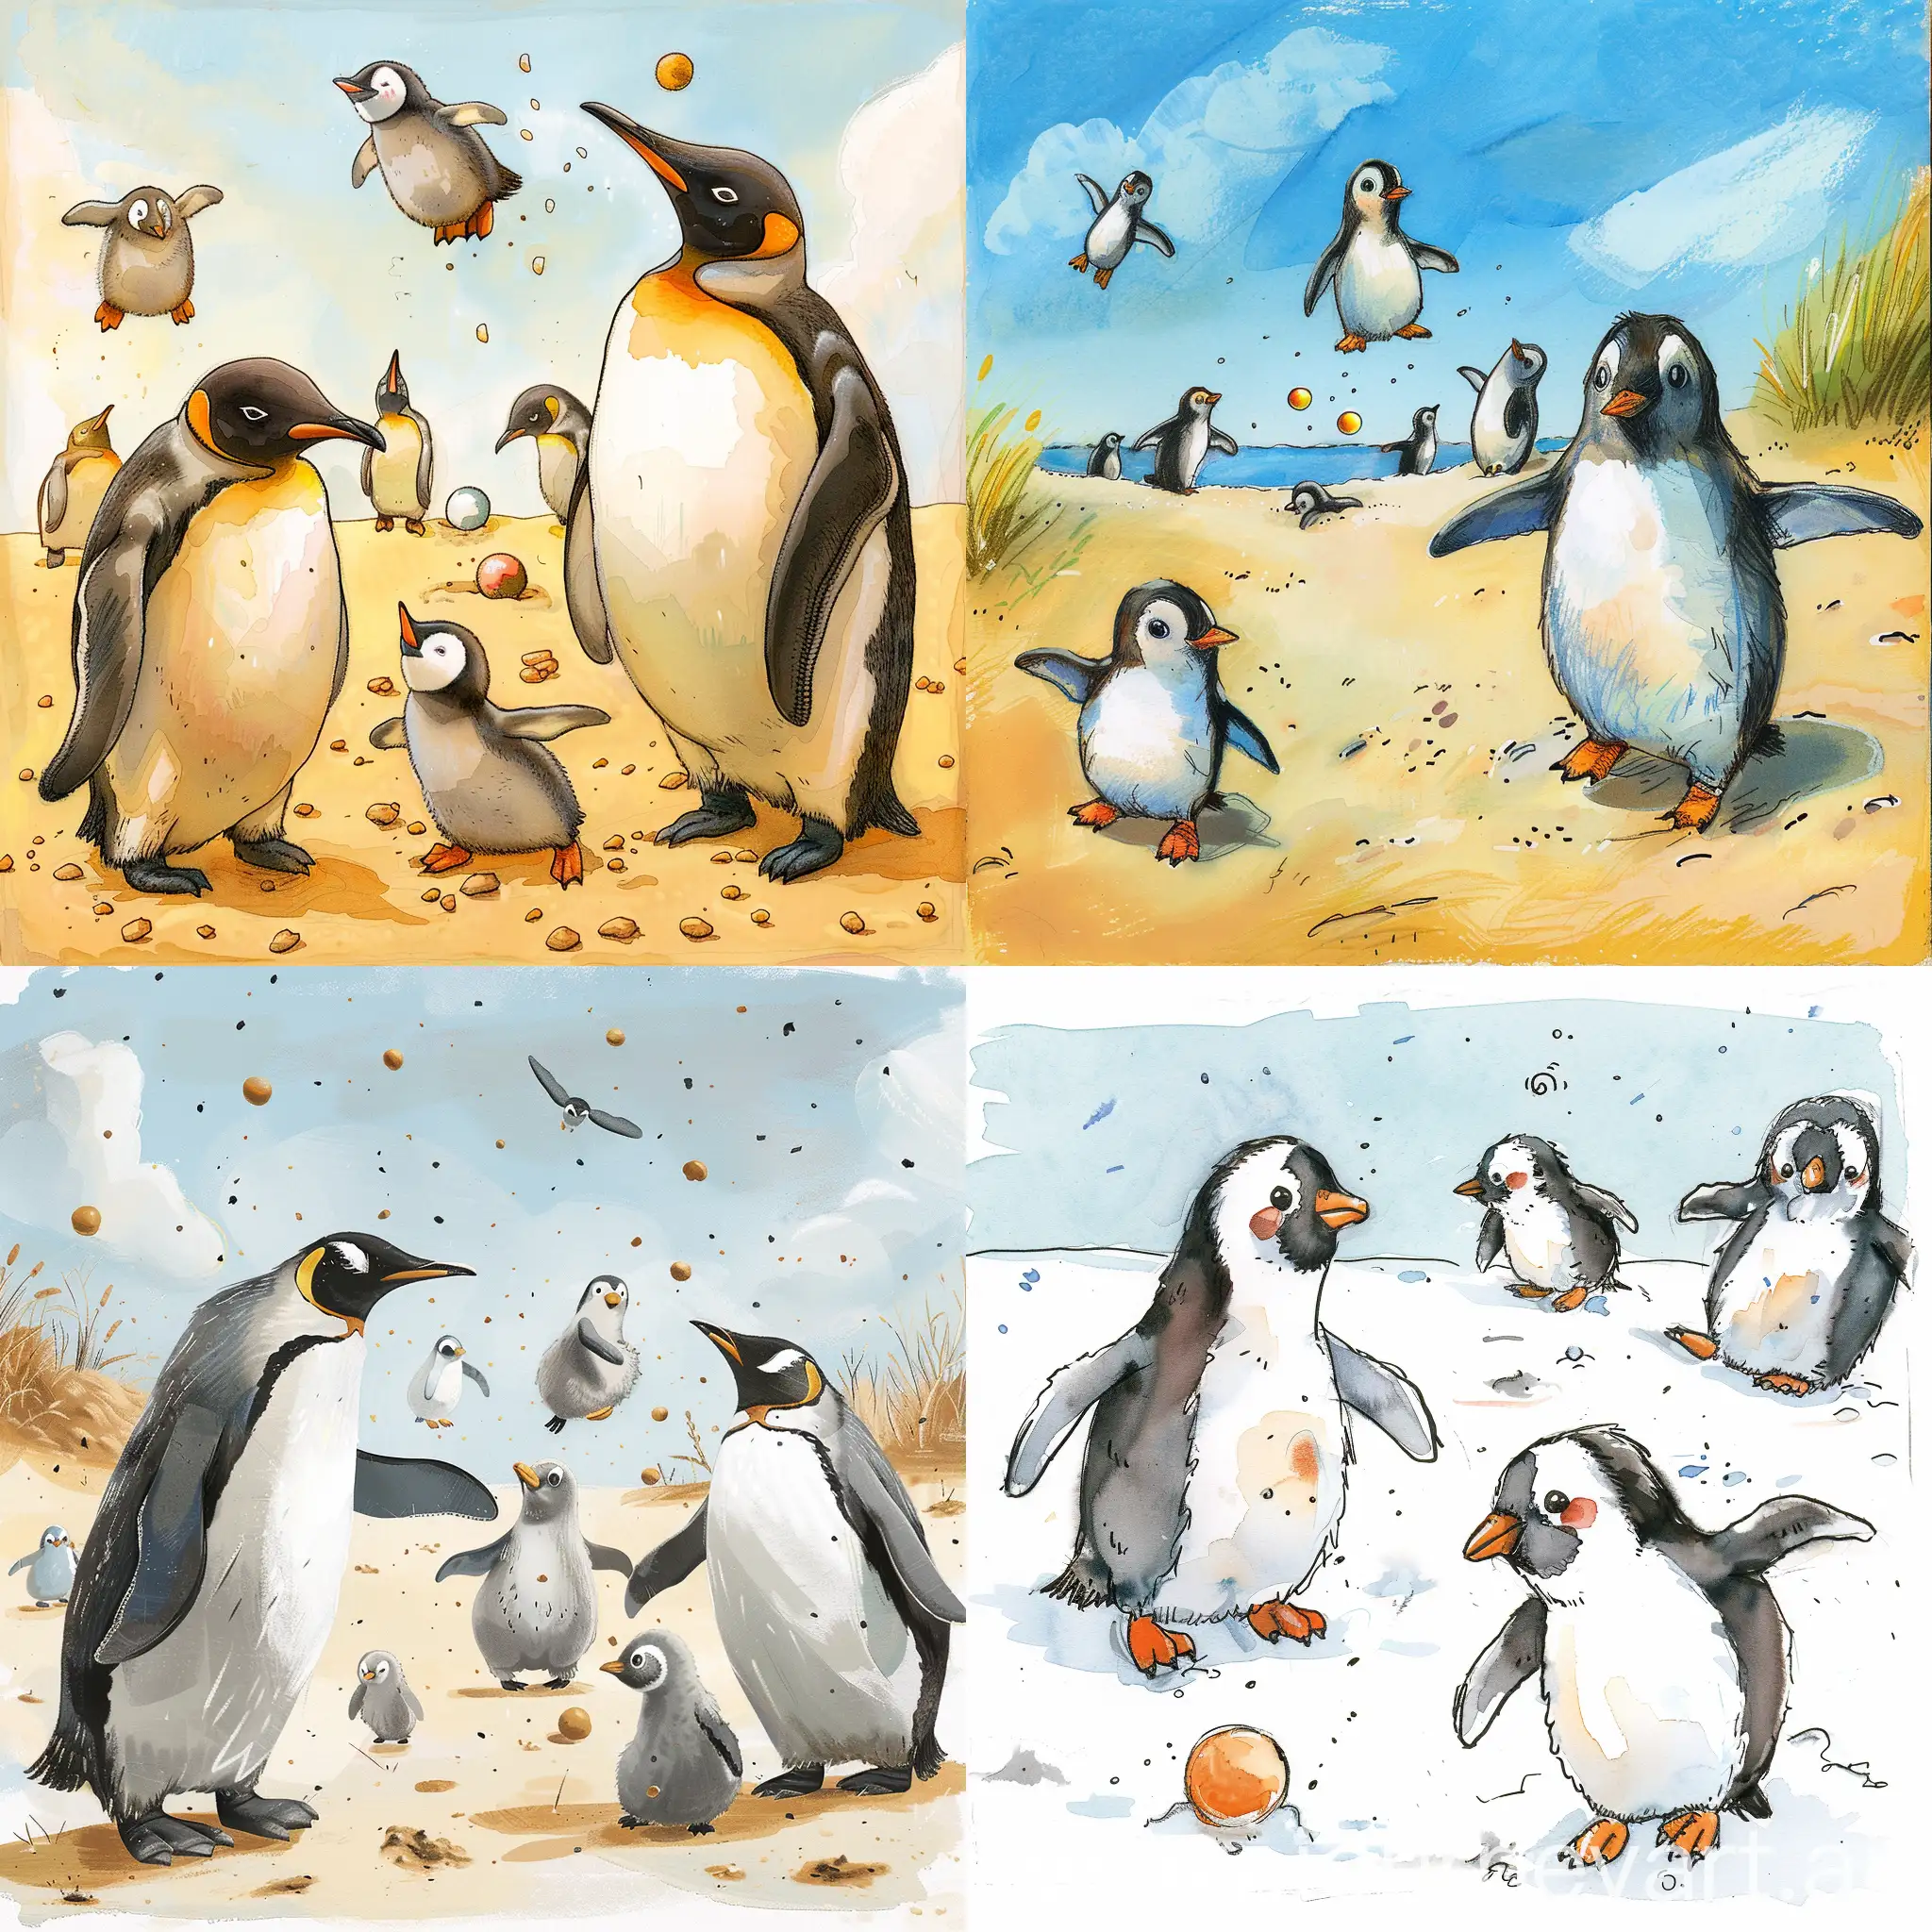 prompt Penguin plays with his parents and wanders off to play ball with other penguin chicks. Storybook illustration